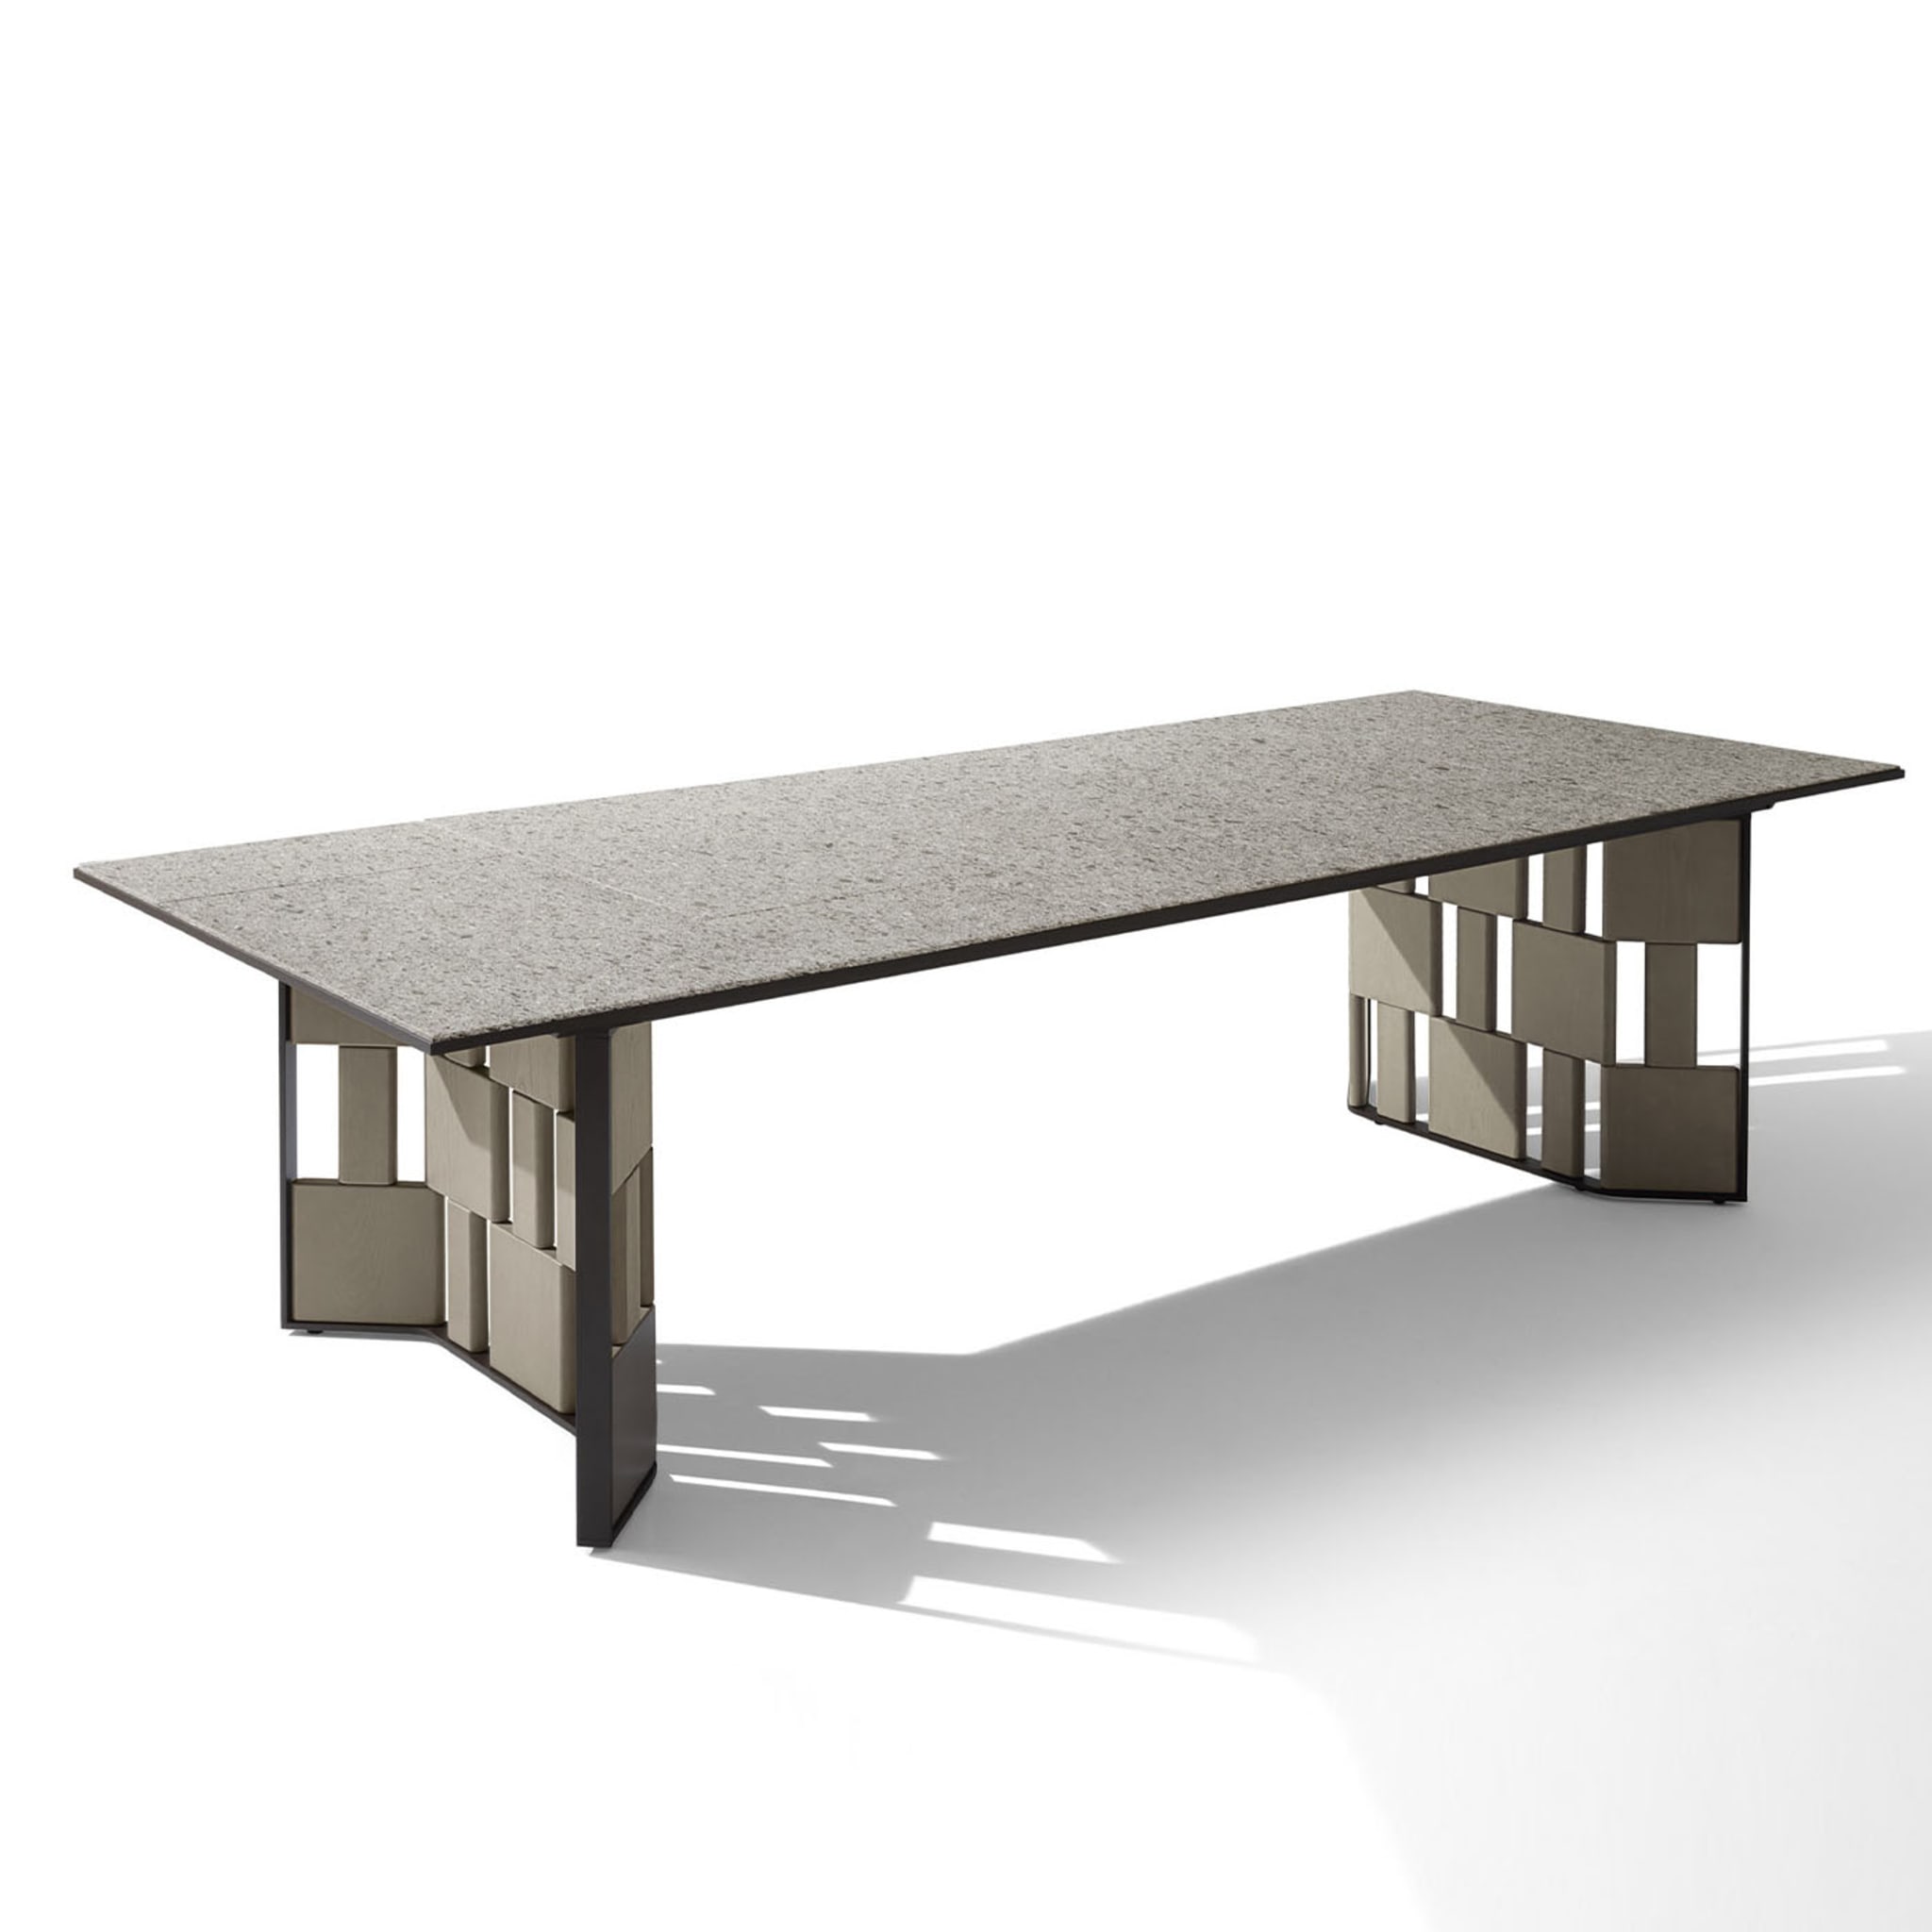 Break Outdoor Dining Tables by Ludovica+Roberto Palomba - Alternative view 1